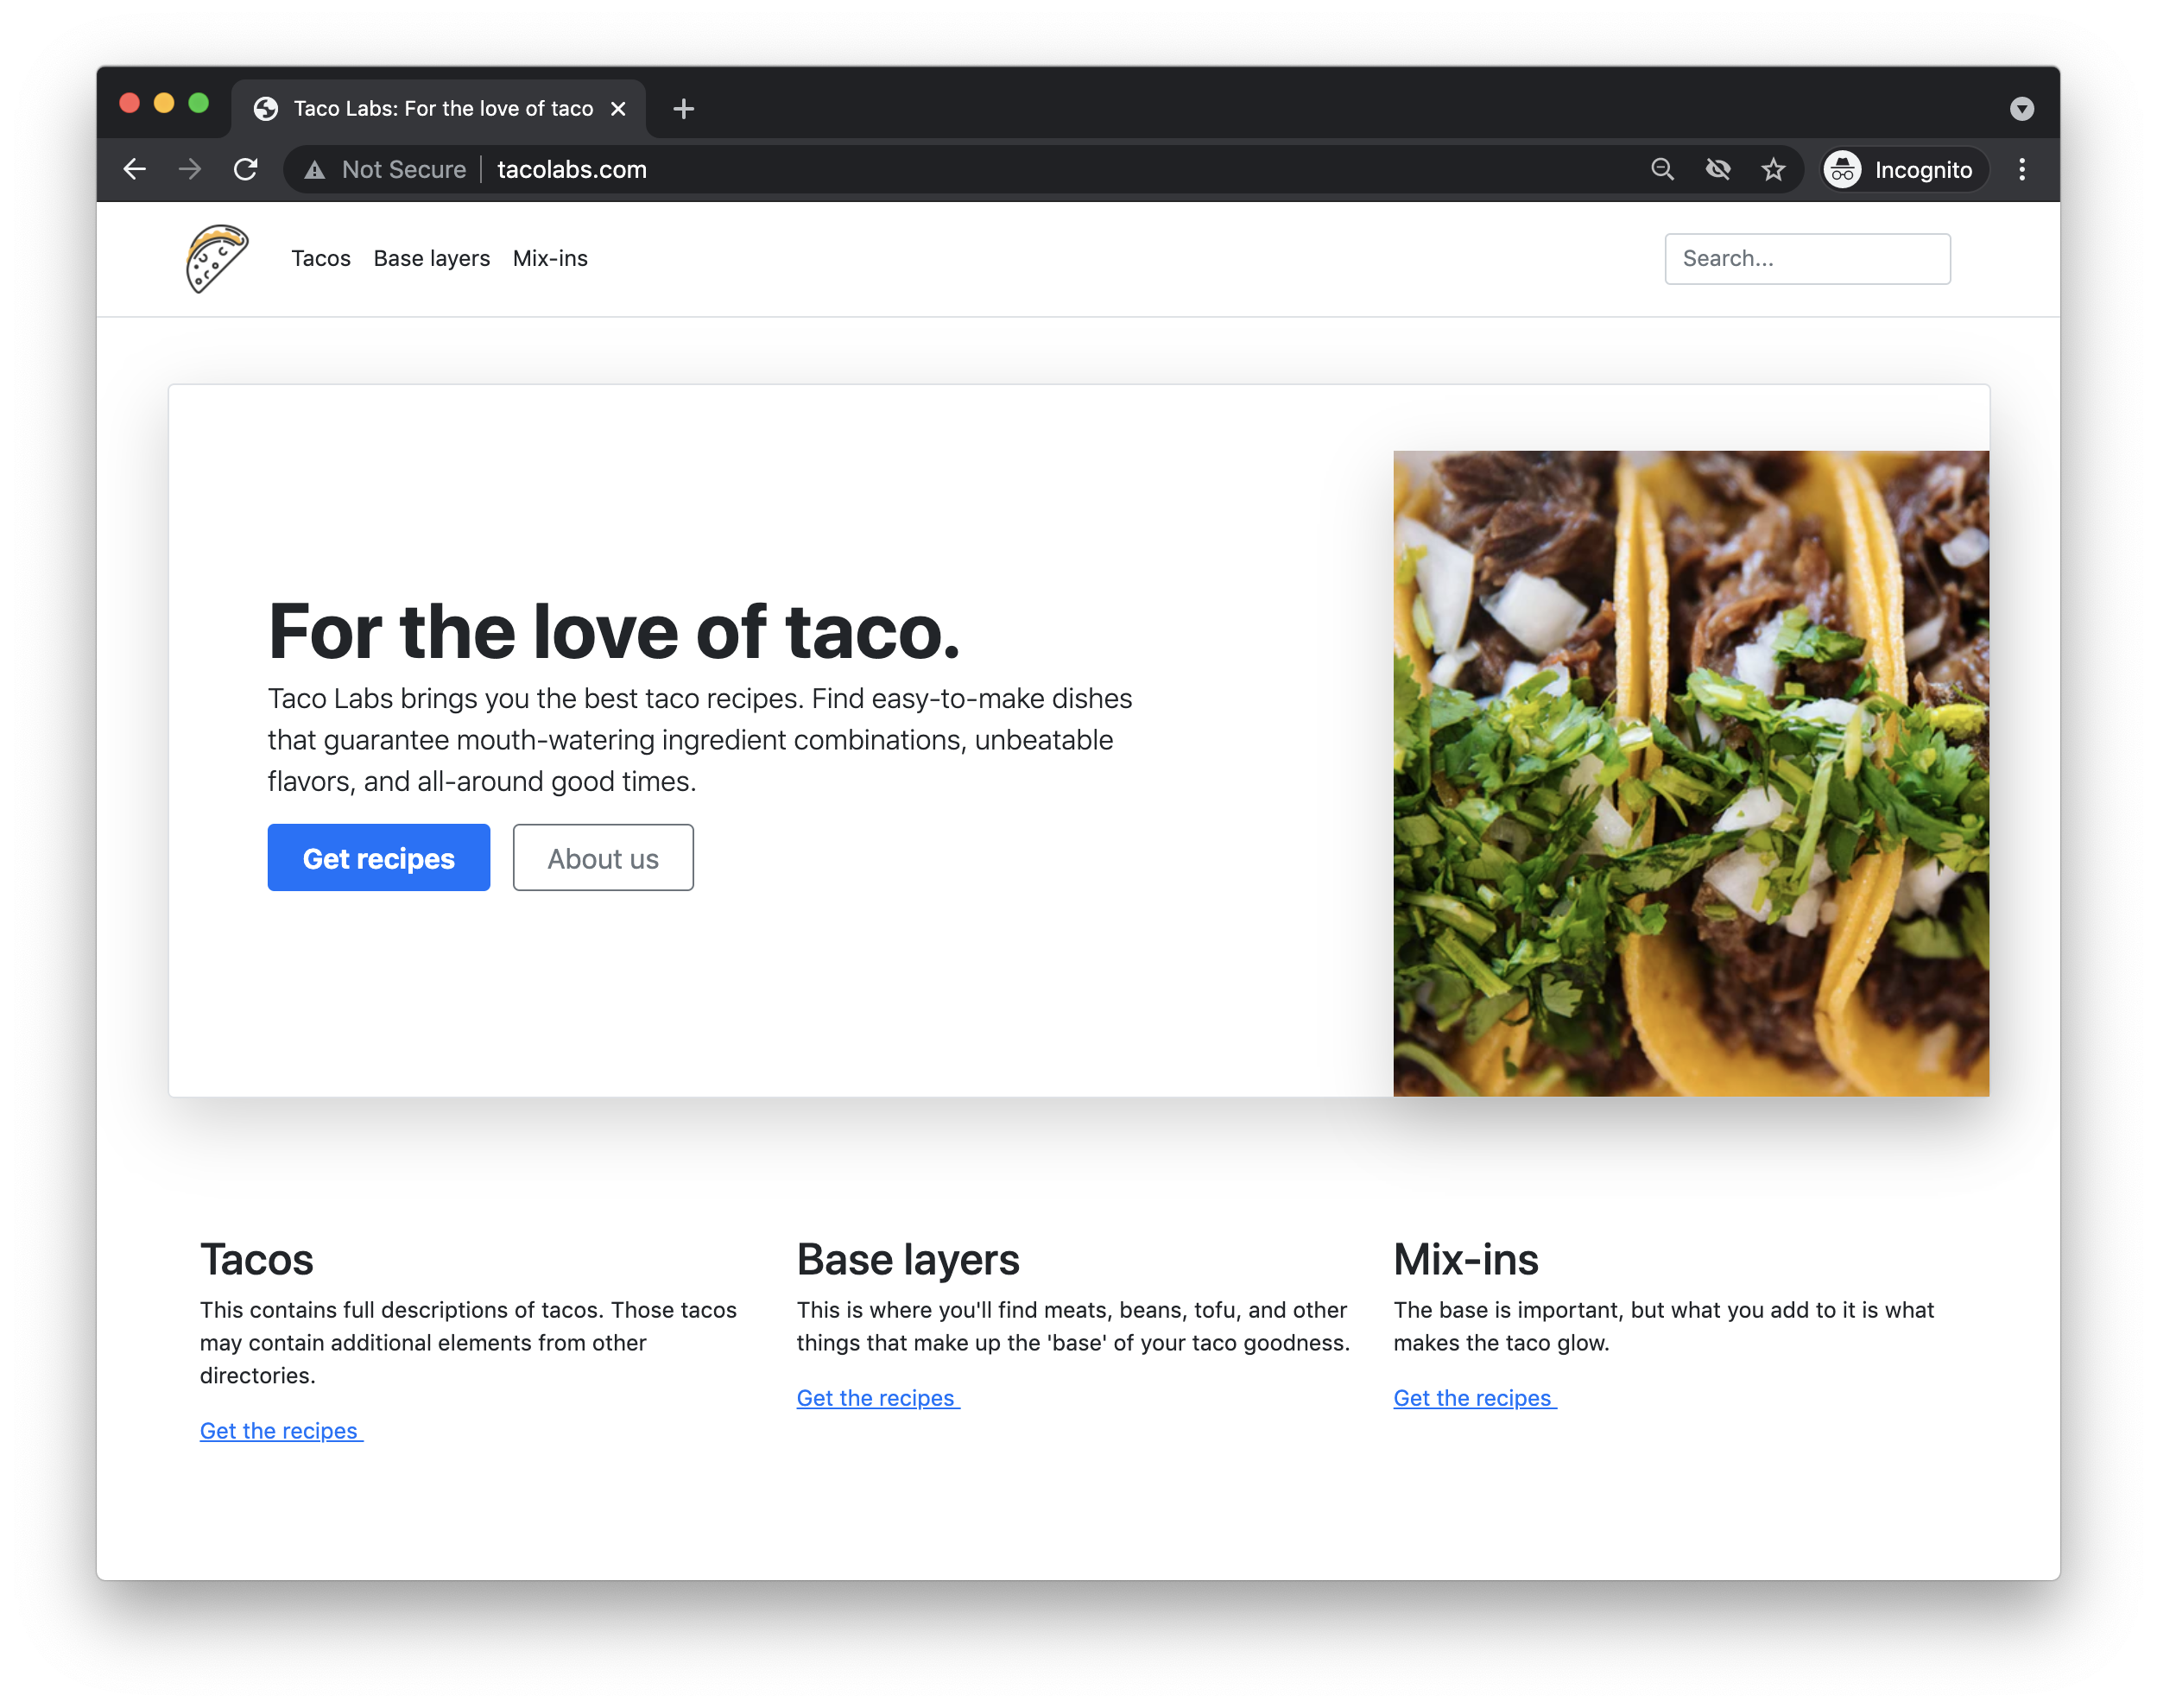 Taco Labs, our example website, hosted on Amazon S3